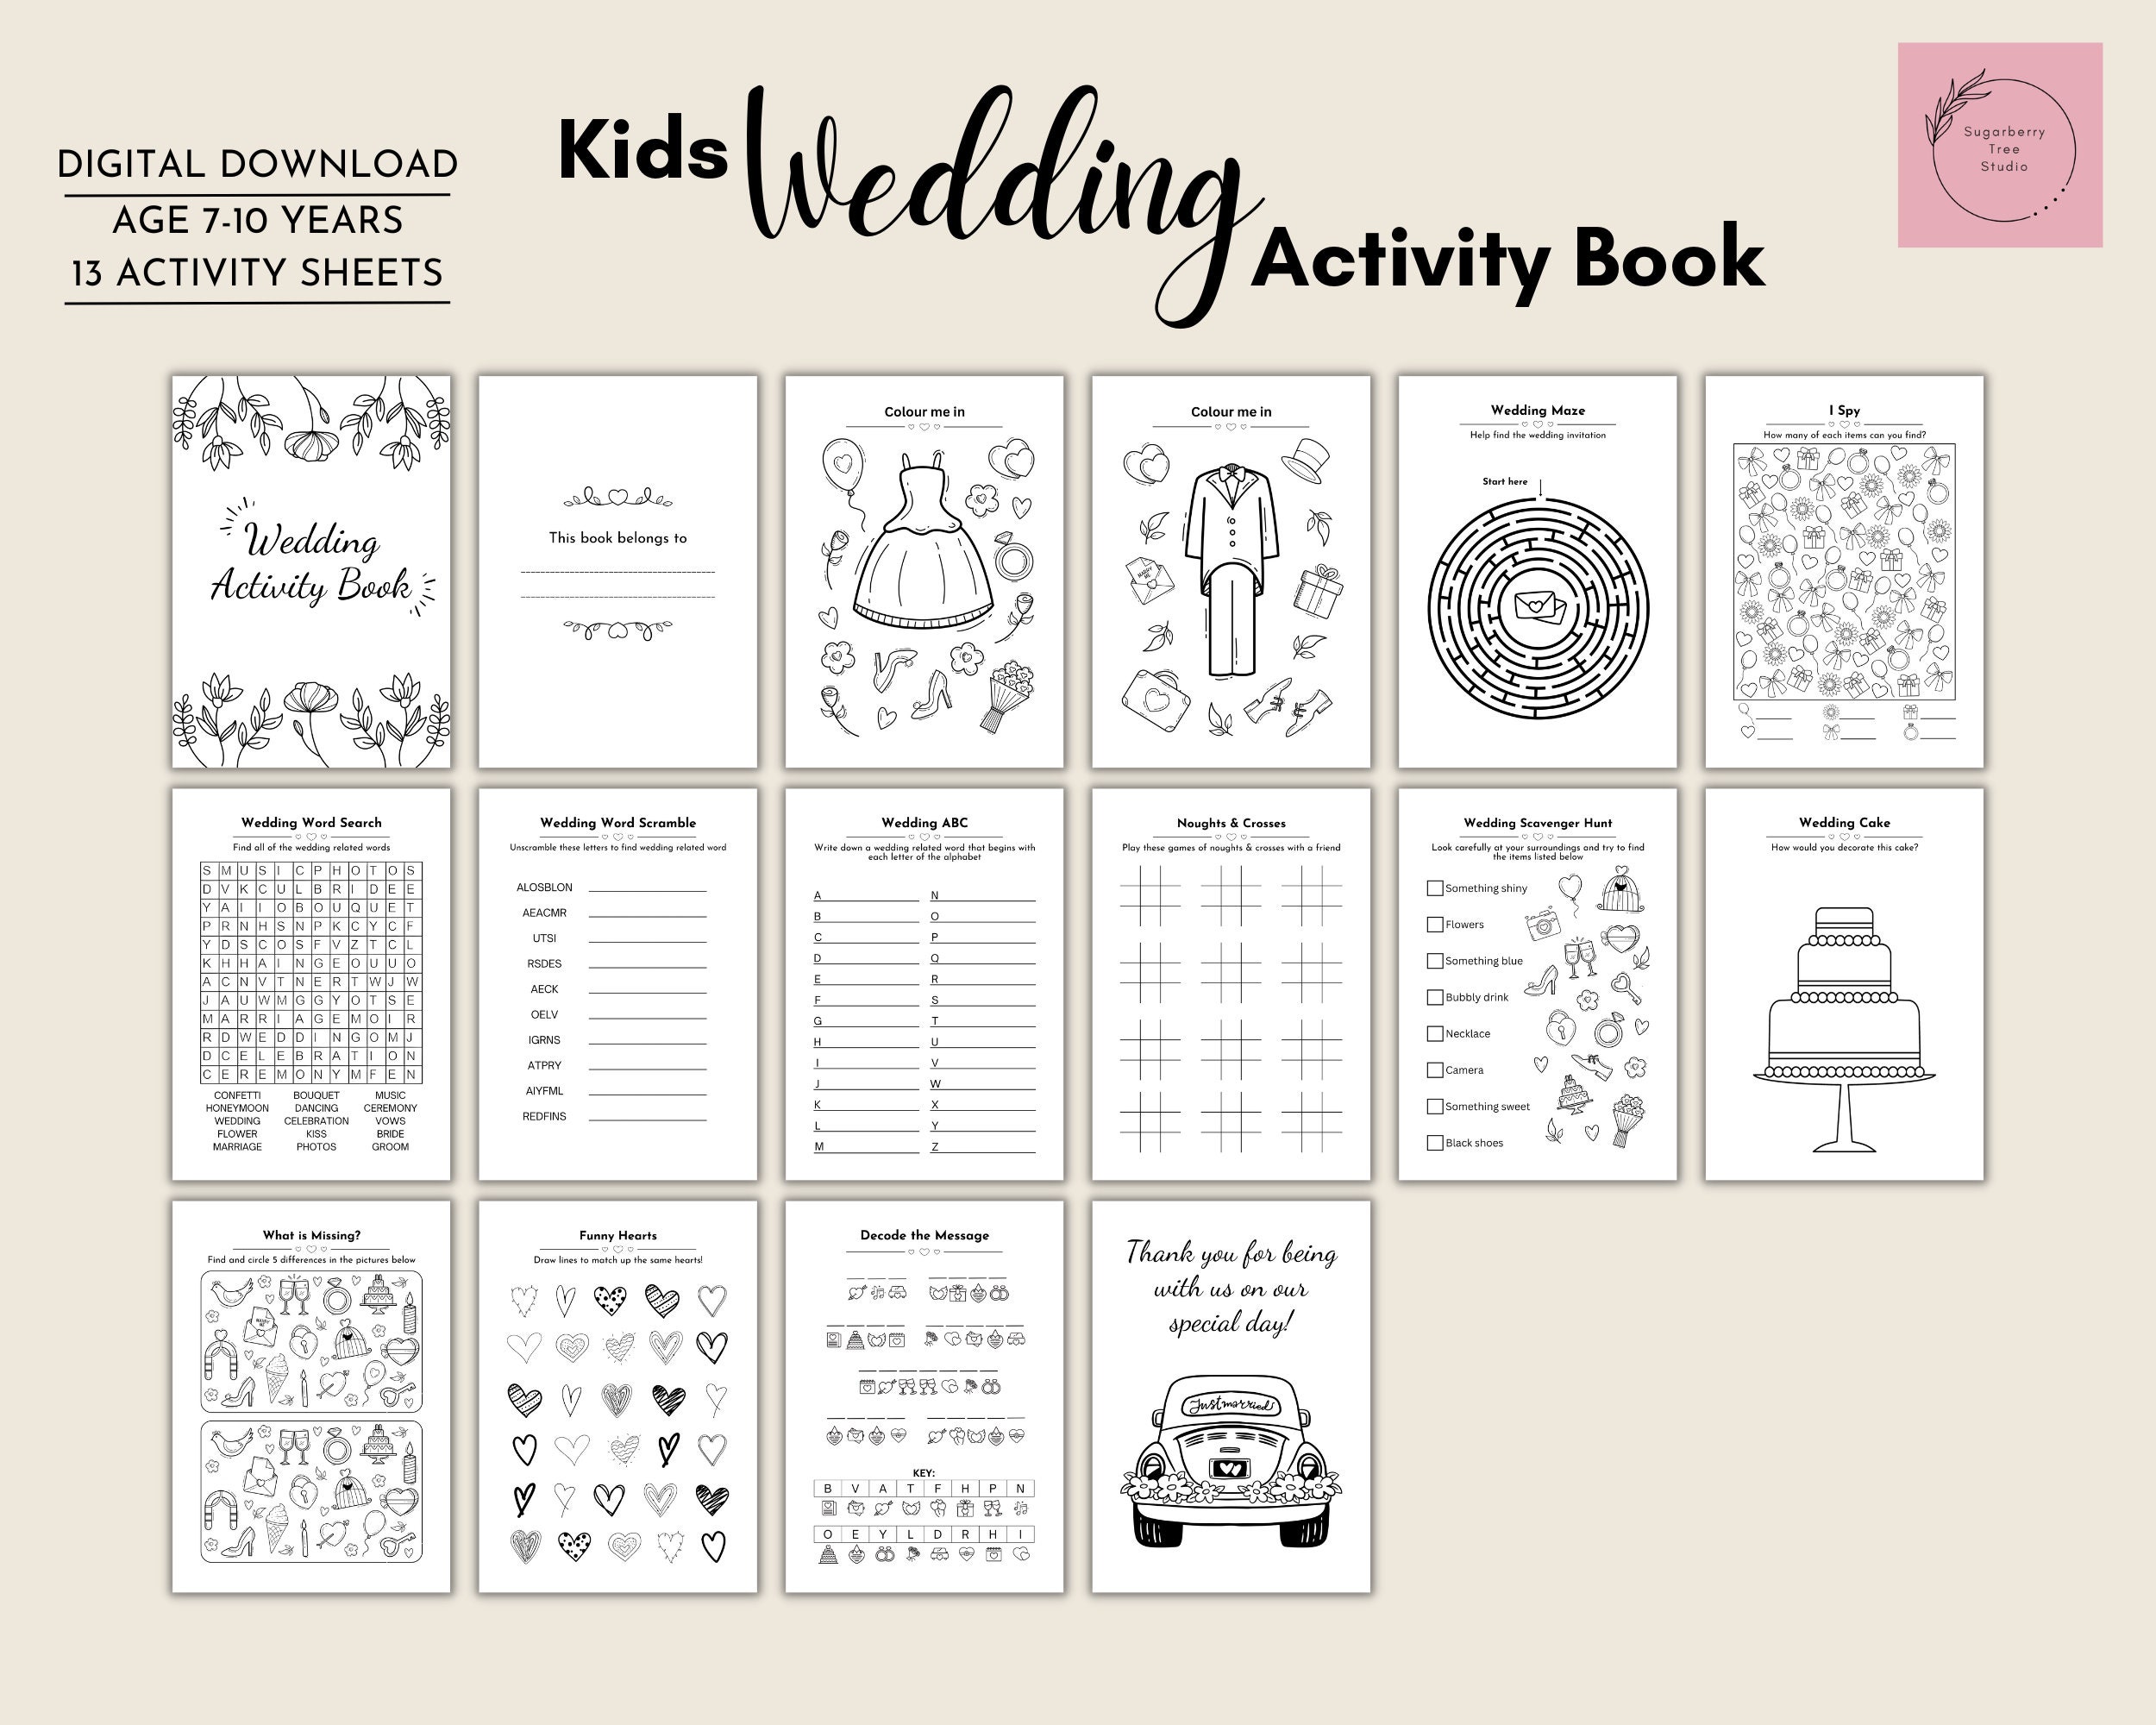 Kids Activity Kits for Wedding Wedding Activity Book for Kids